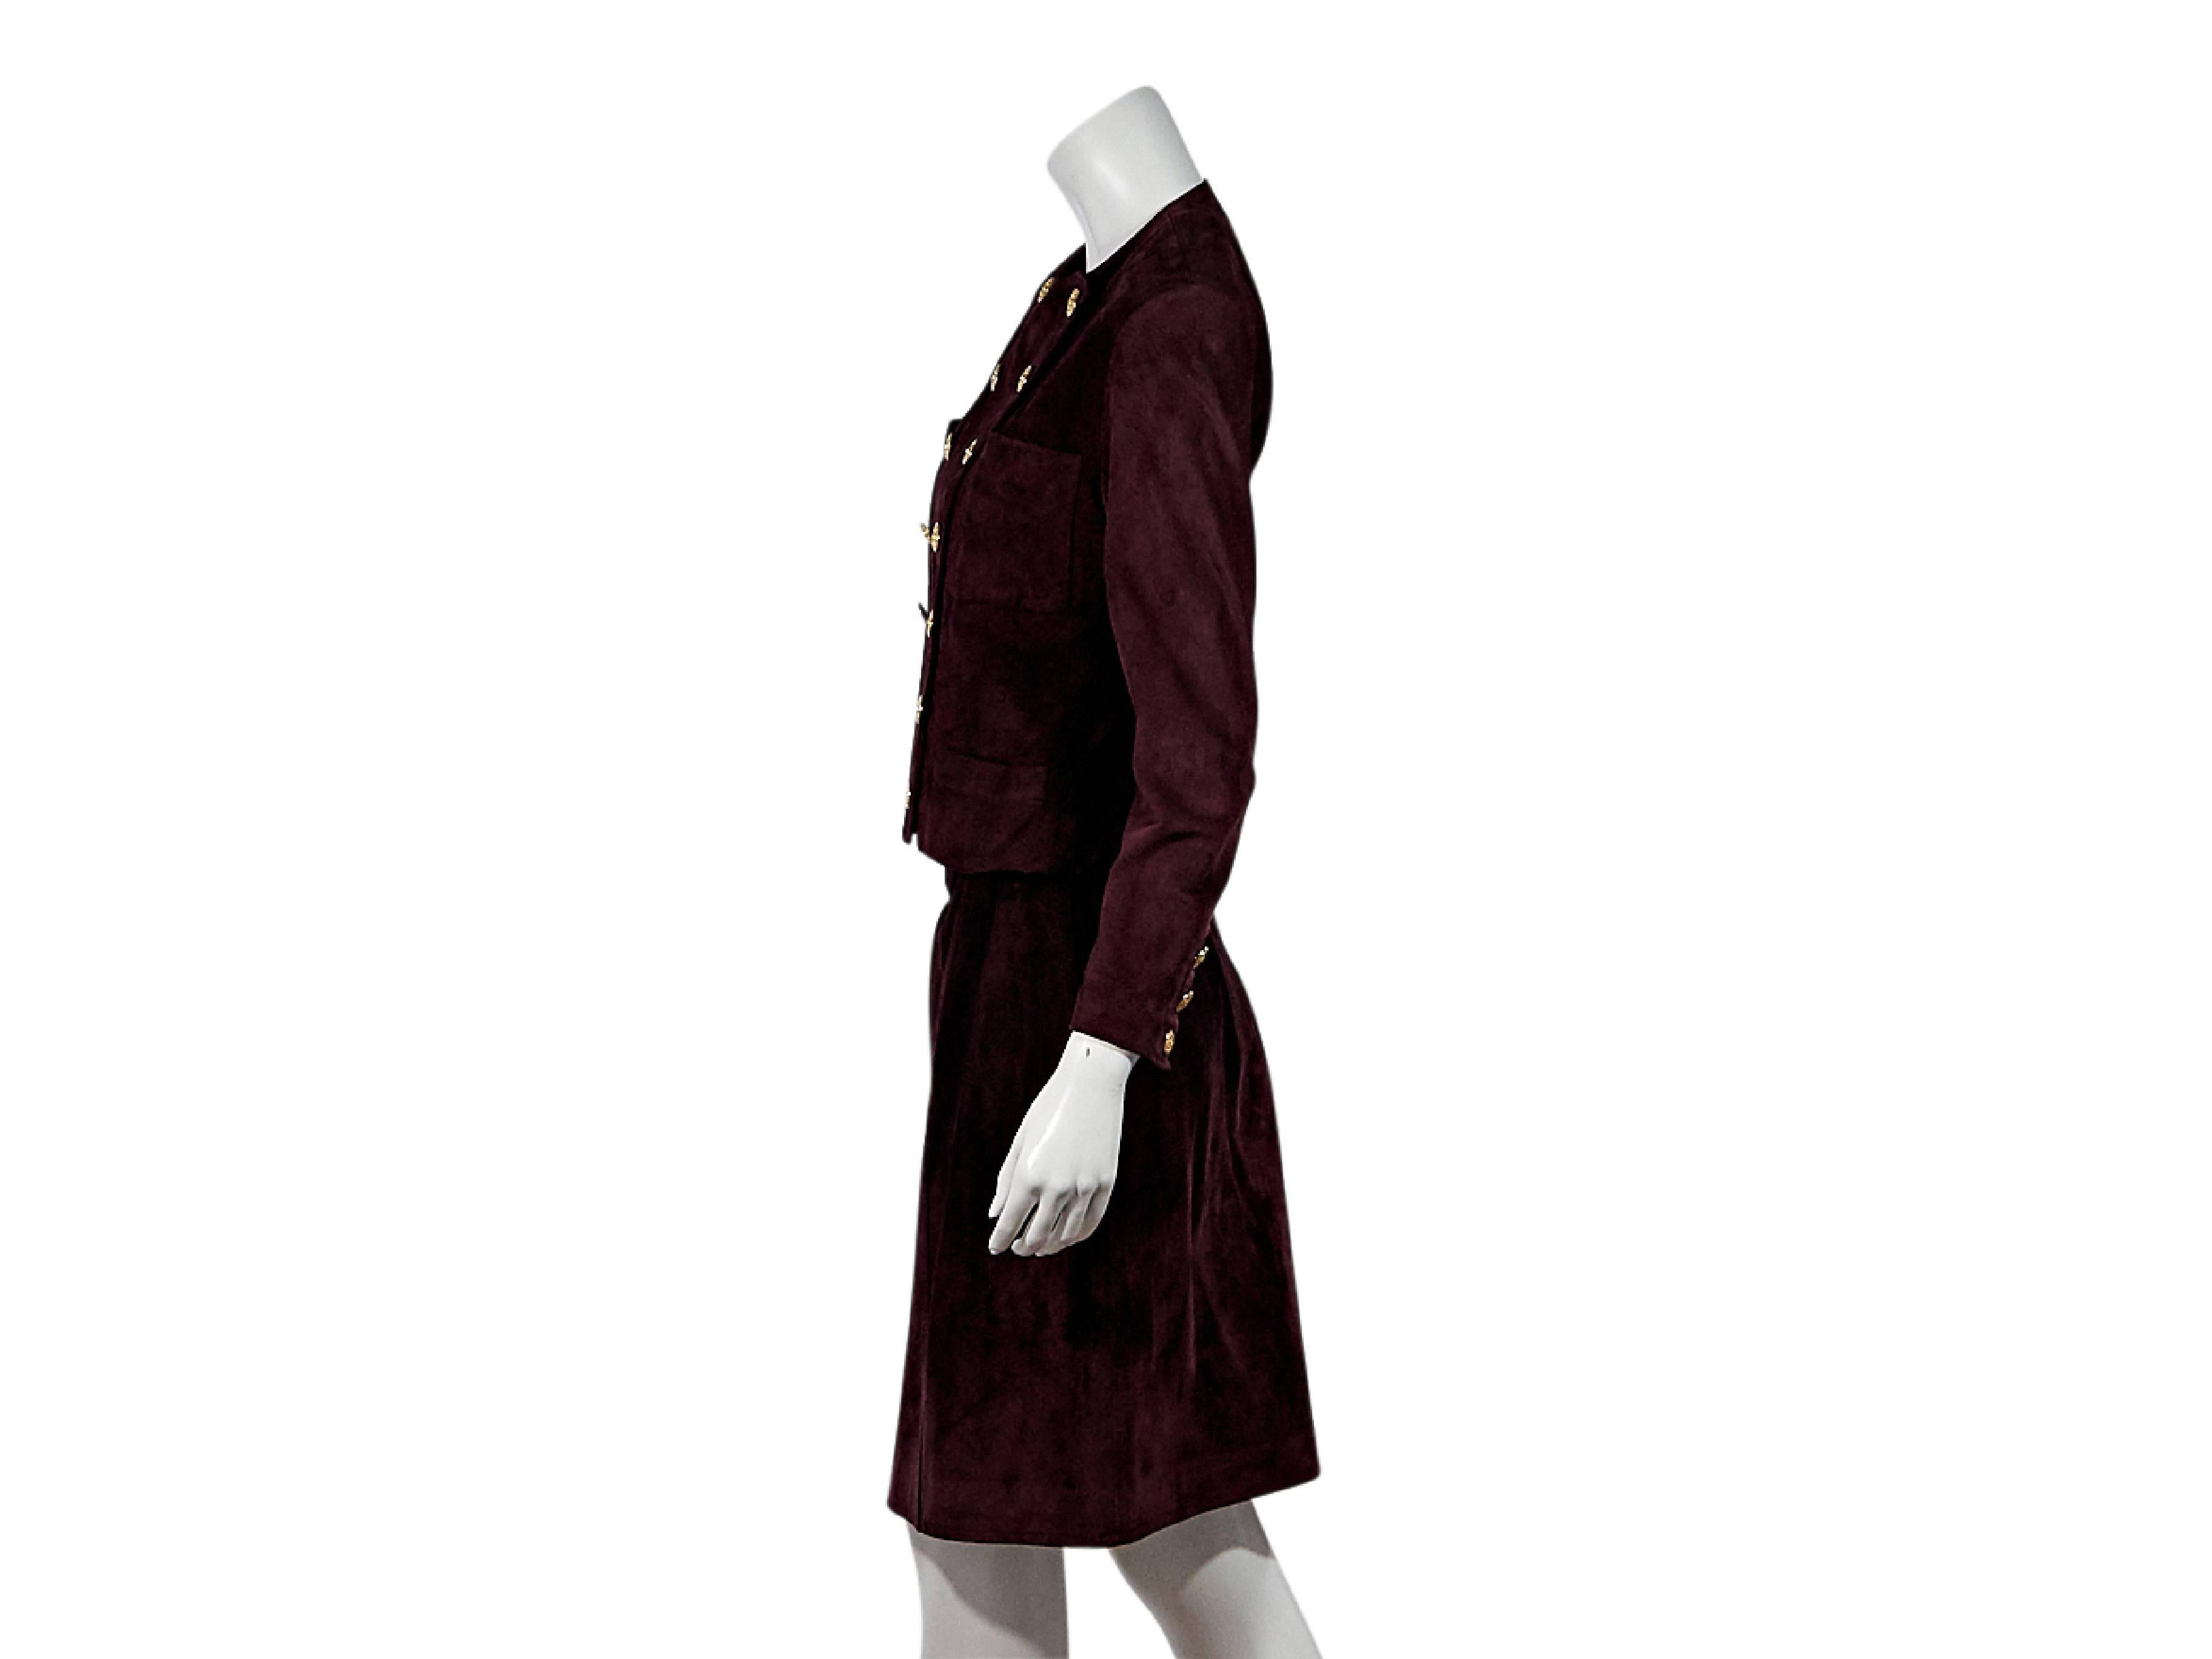 Product details:  Burgundy suede skirt suit set by Chanel.  Crewneck.  Bracelet-length sleeves.  Three-button detail at cuffs.  Double-breasted button front.  Chest and waist patch pockets.  Matching pencil skirt.  Banded waist.  Concealed back zip